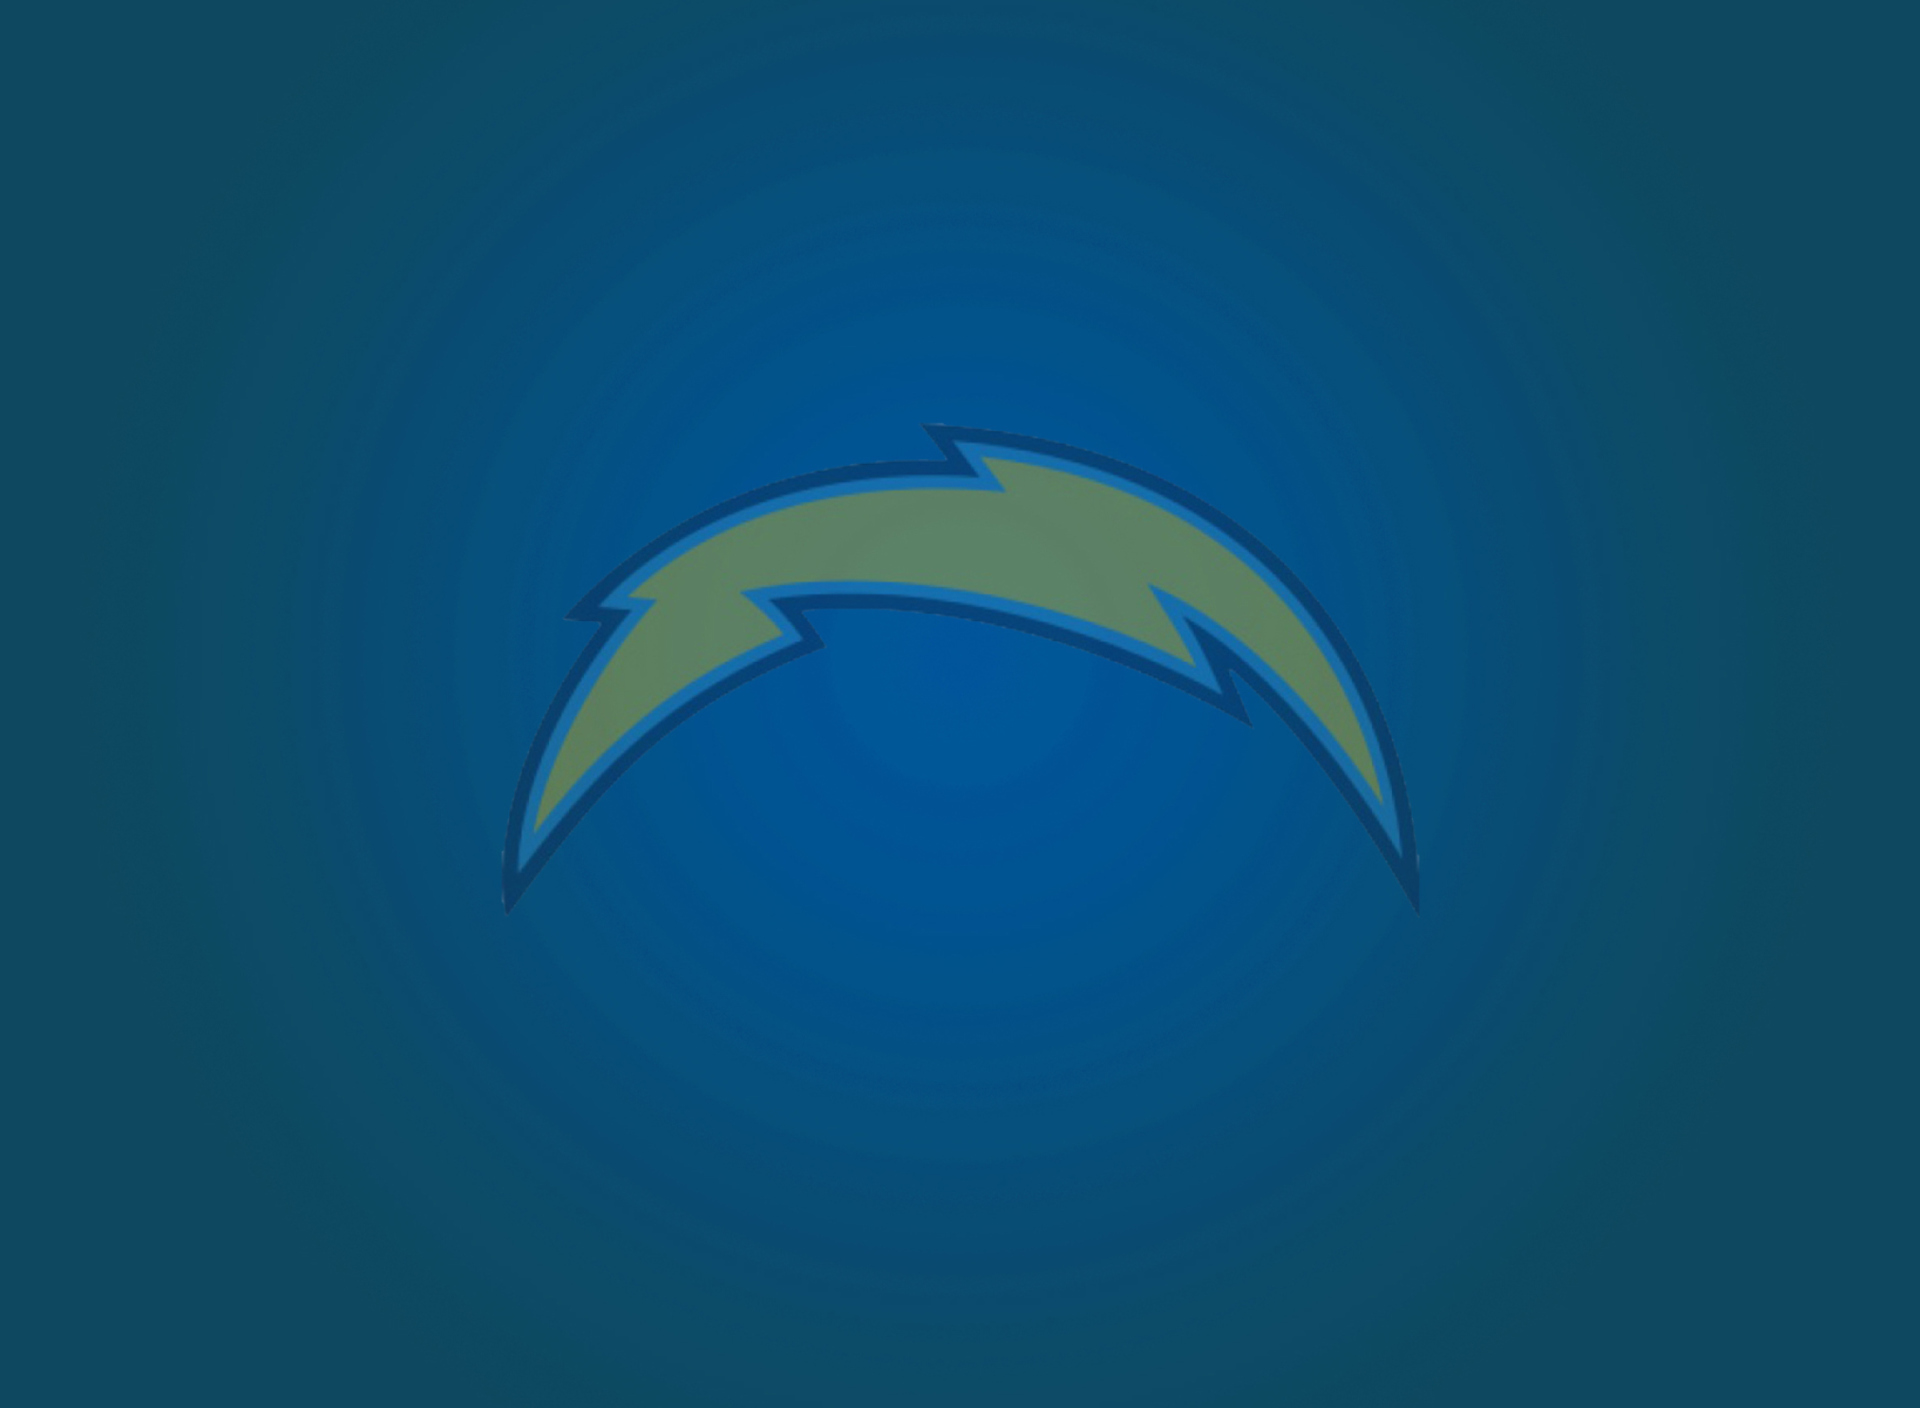 San Diego Chargers Wallpaper for Samsung Galaxy Note 3